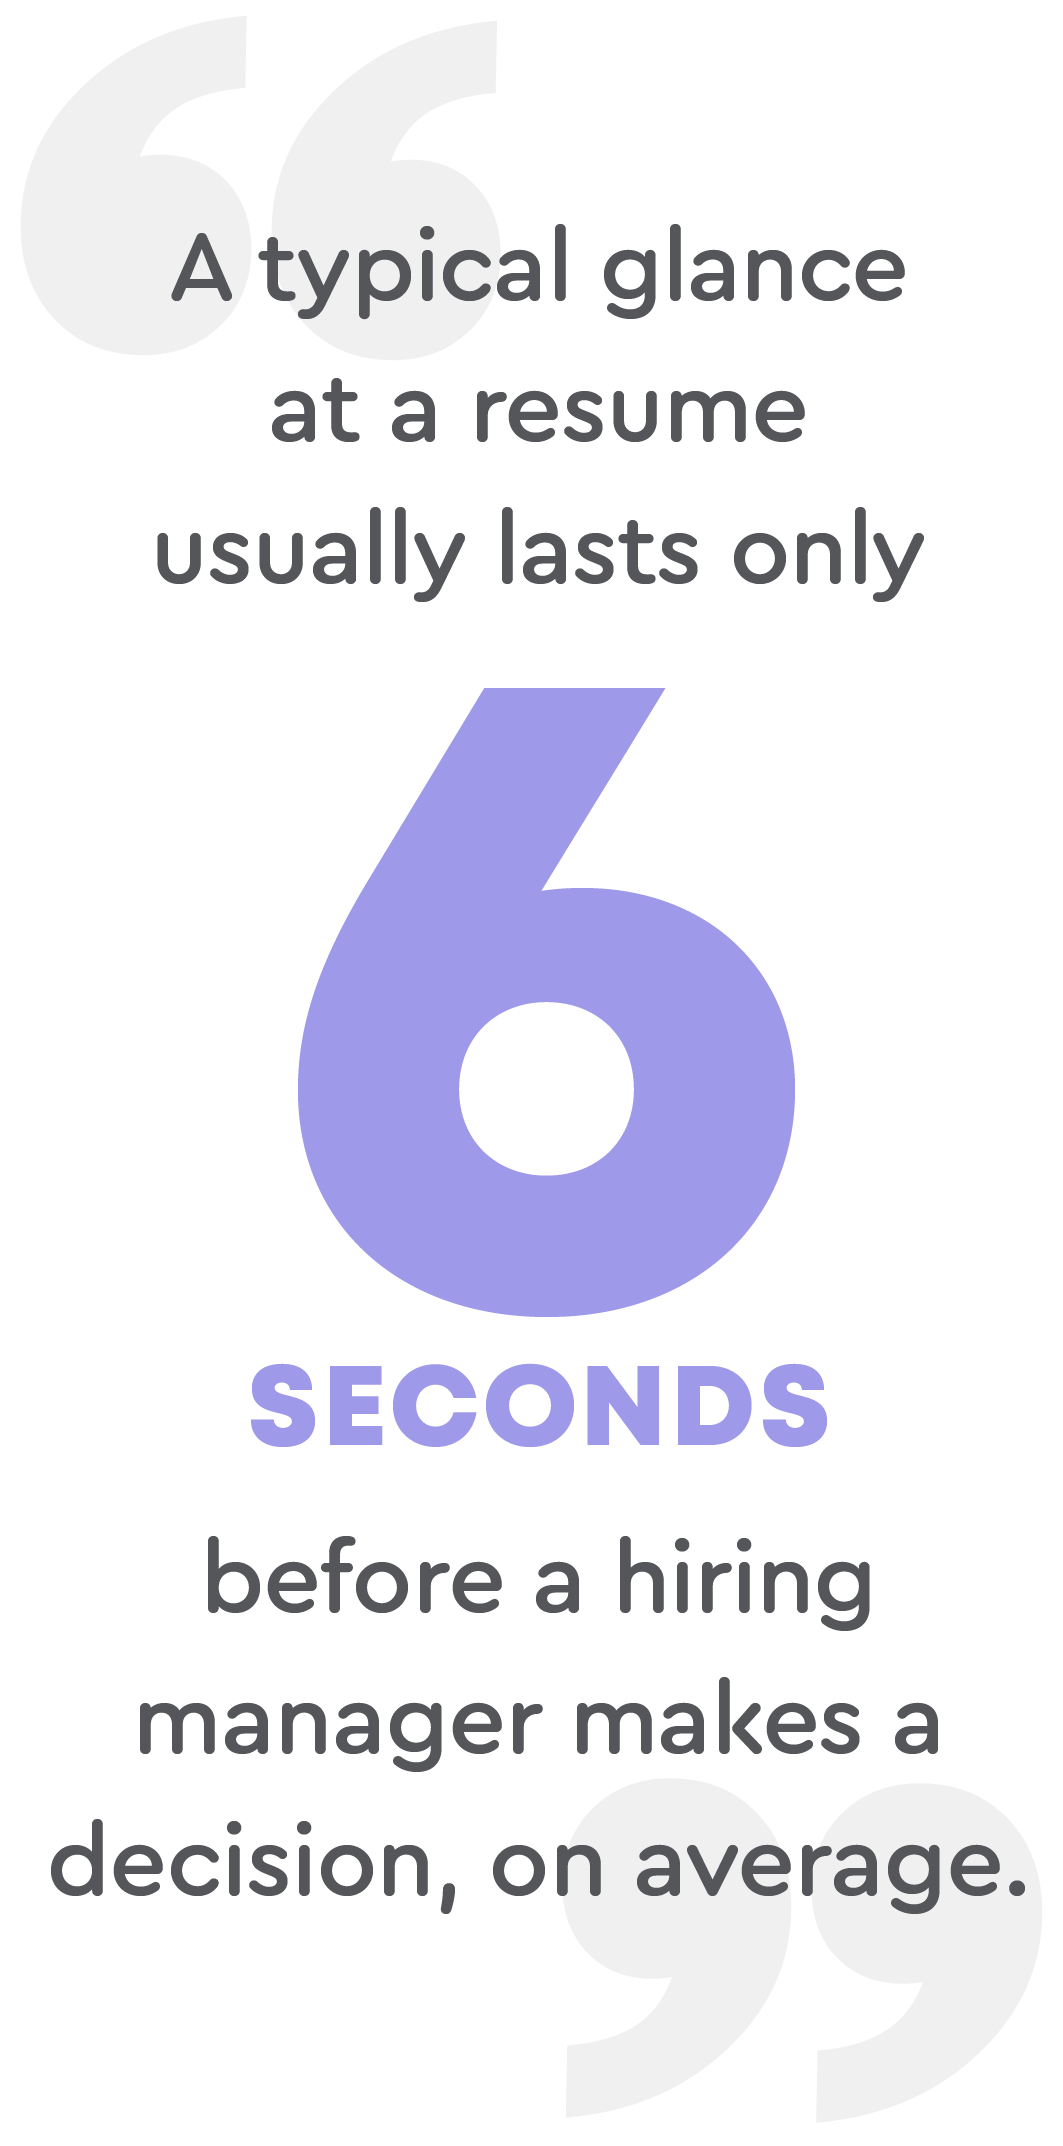 A typical glance at a resume last only 6 seconds